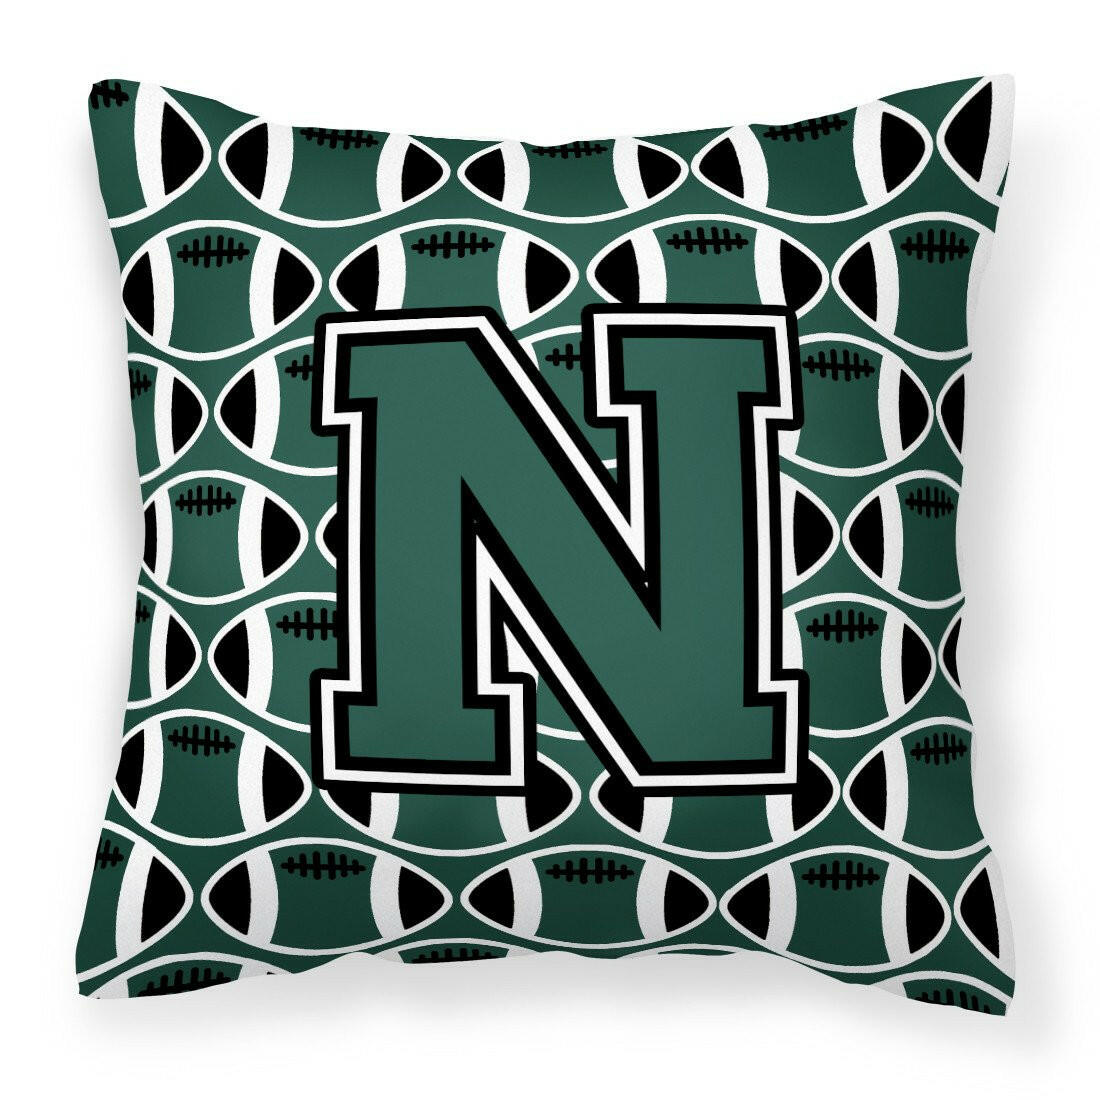 Letter N Football Green and White Fabric Decorative Pillow CJ1071-NPW1414 by Caroline's Treasures